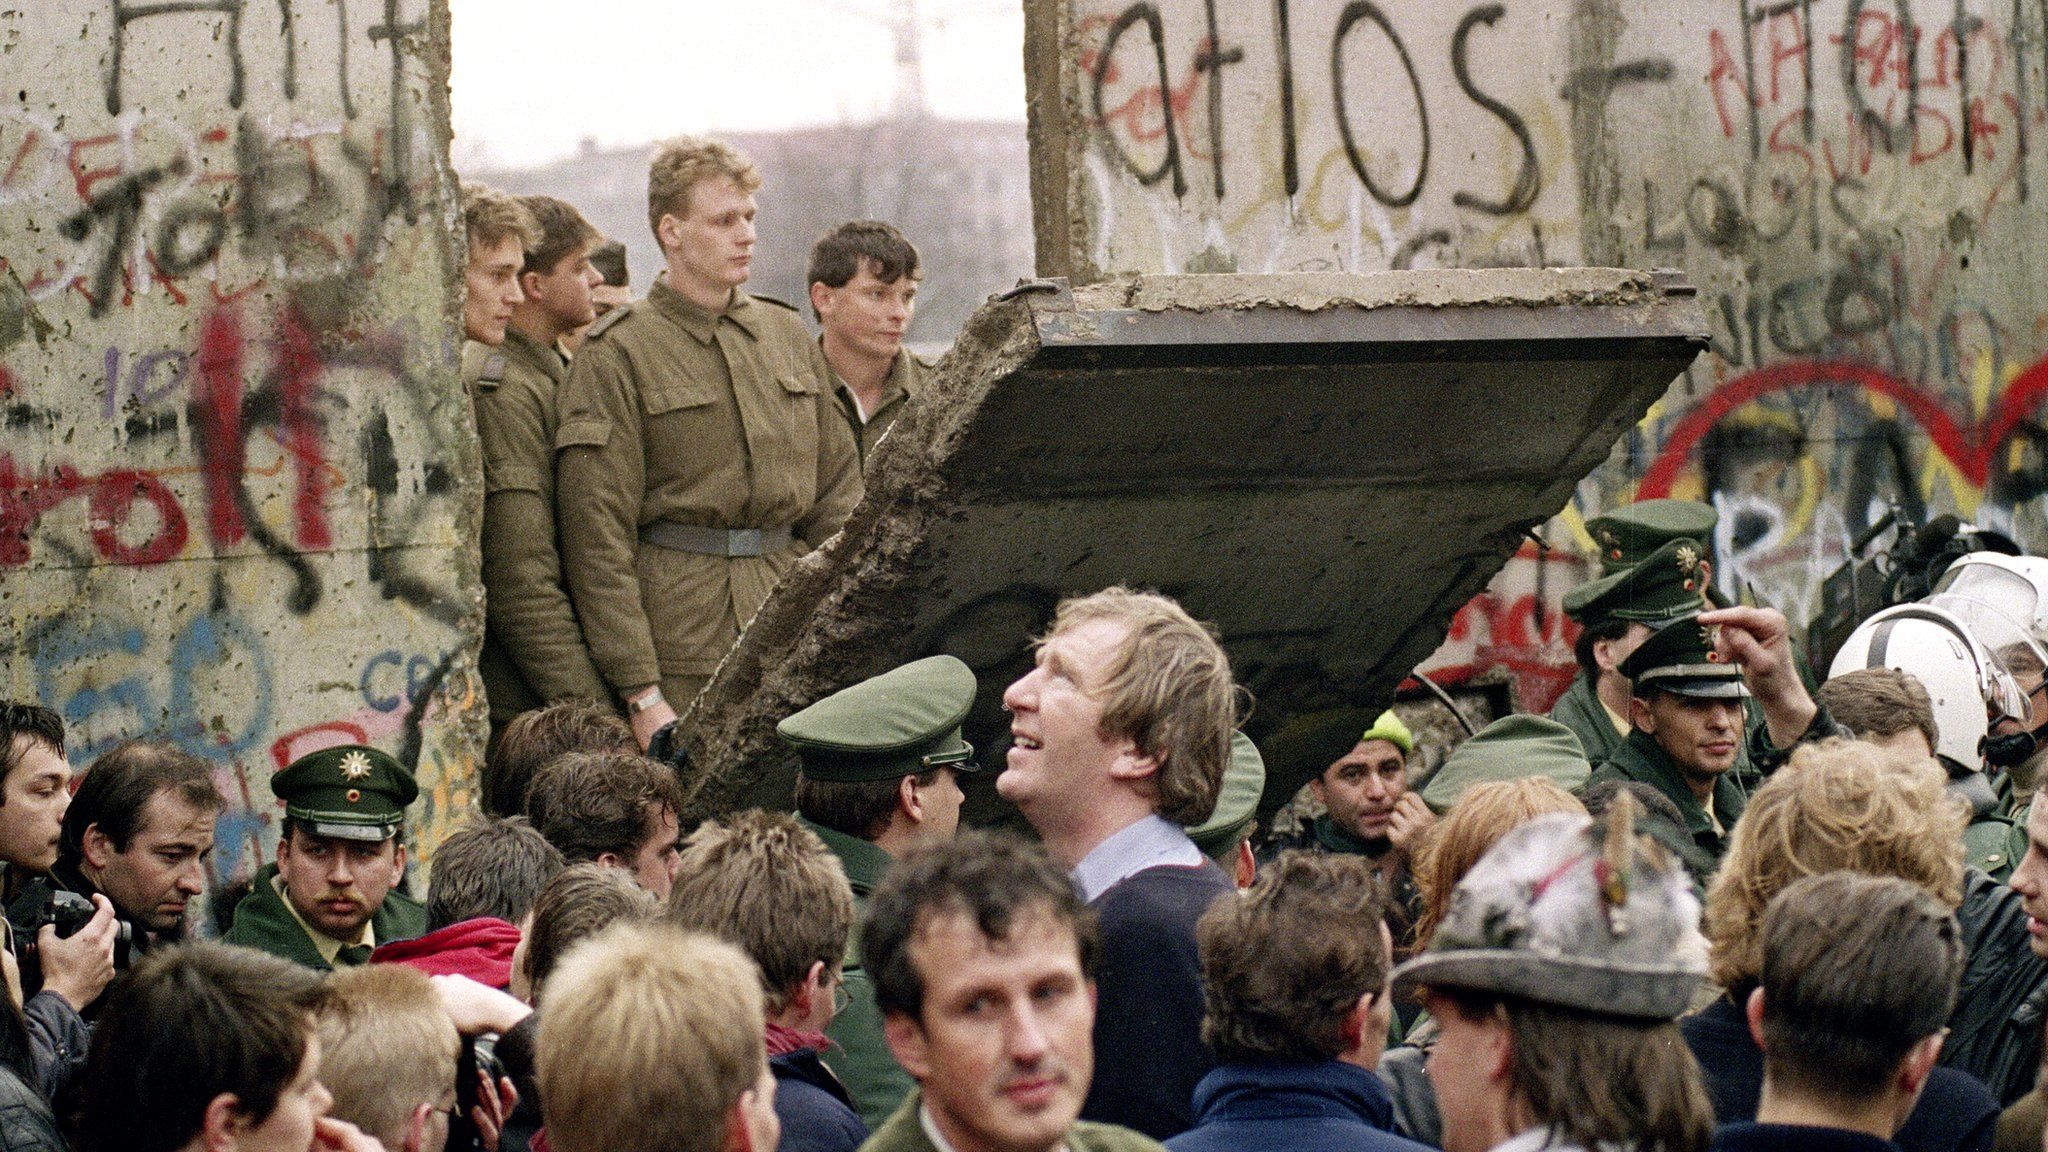 West Berliners crowd in front of the Berlin Wall early 11 November 1989 as they watch East German border guards demolishing a section to open a new crossing point between East and West Berlin